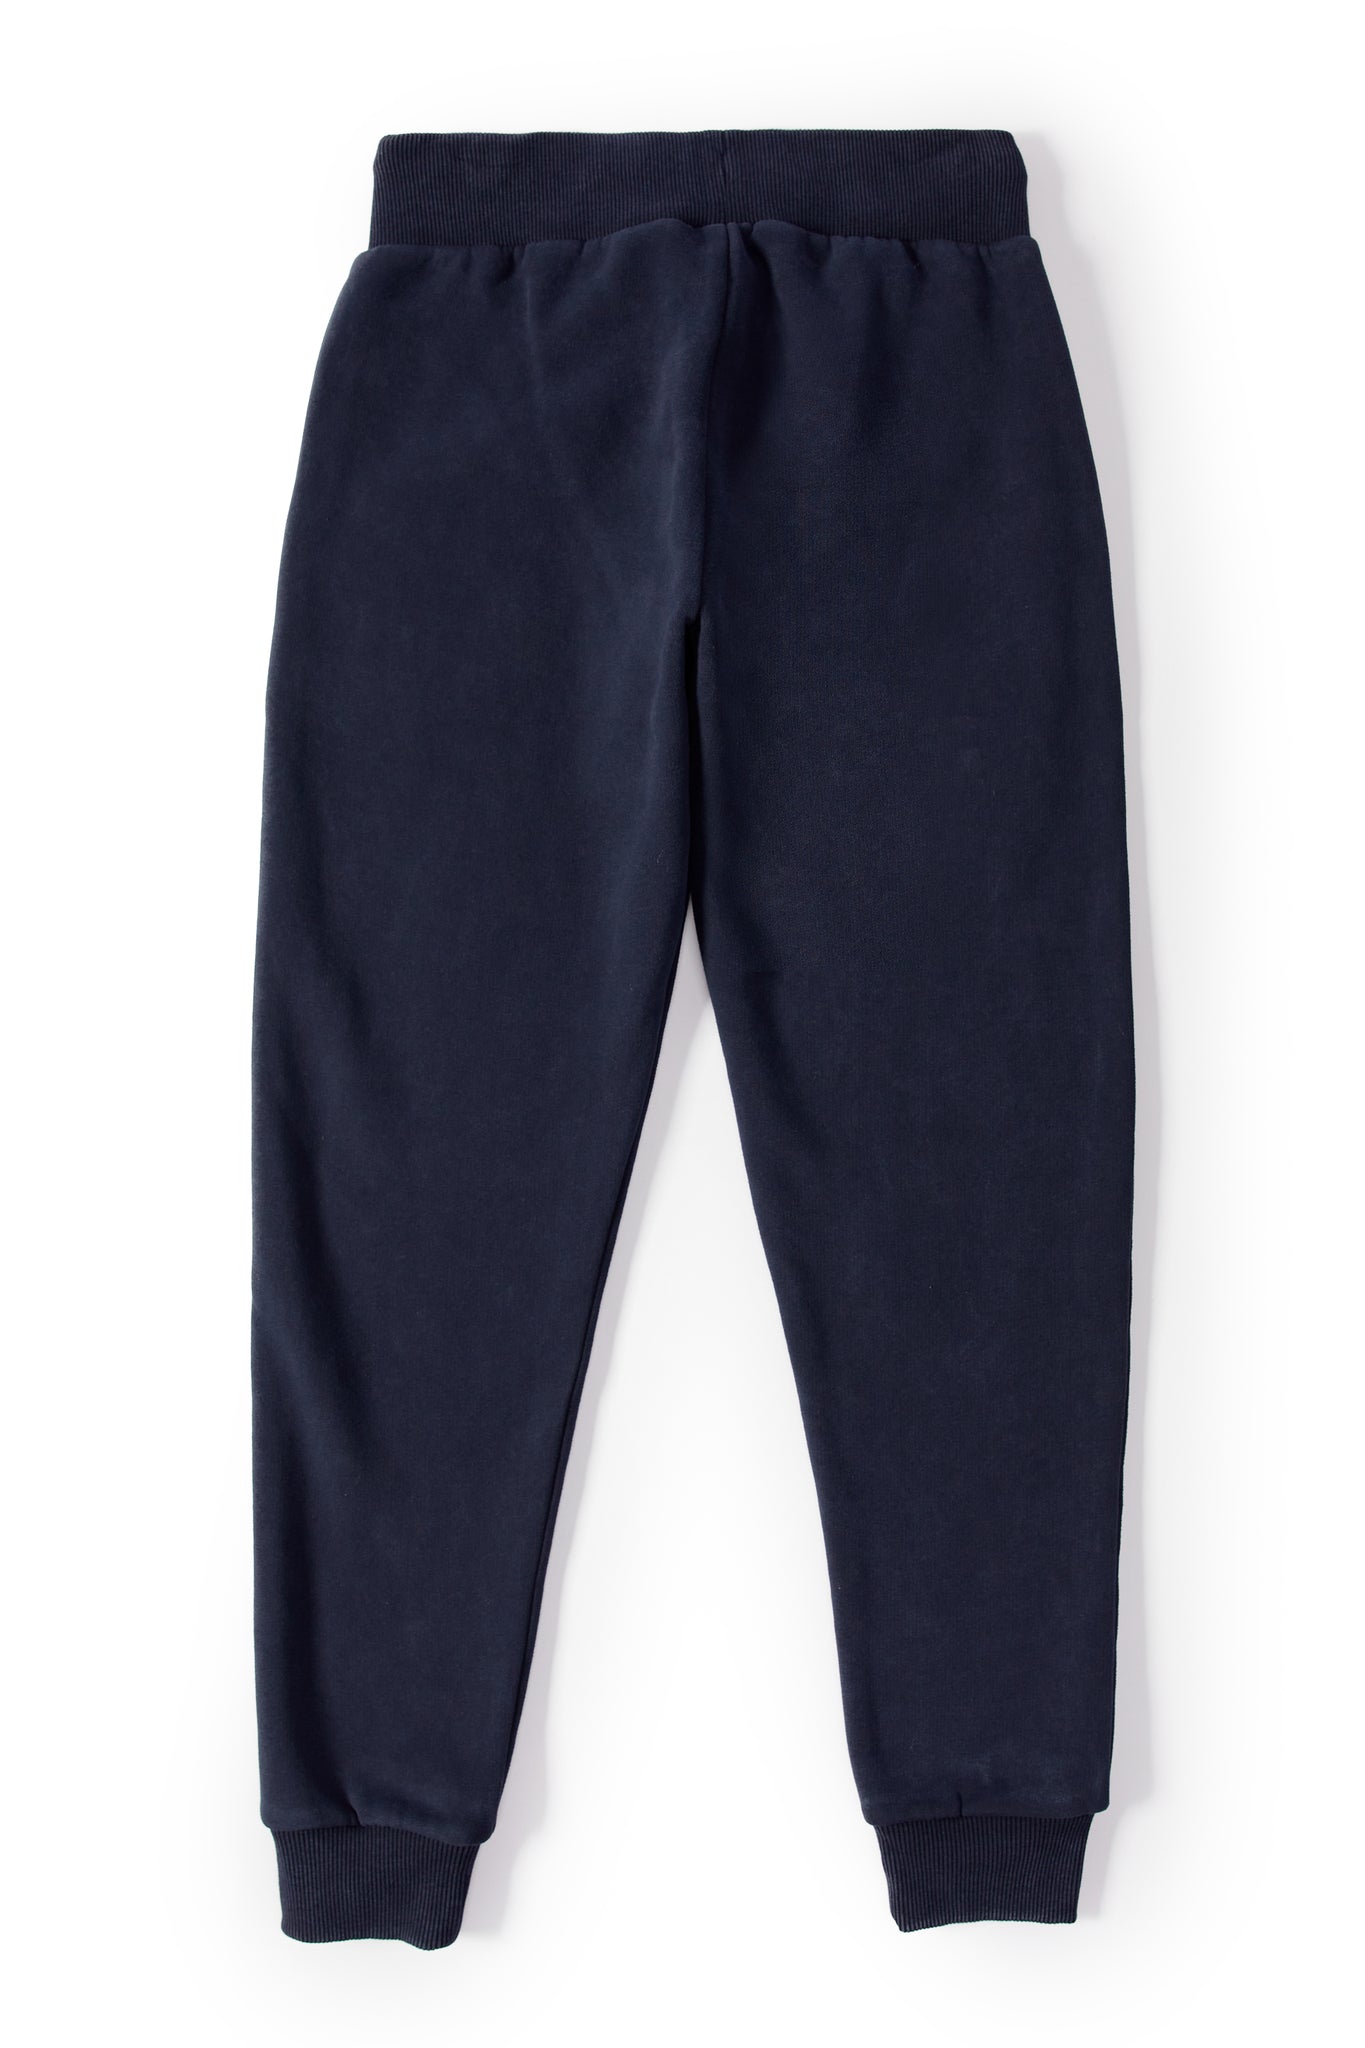 Sporting Goods Jogger (Ink Navy)